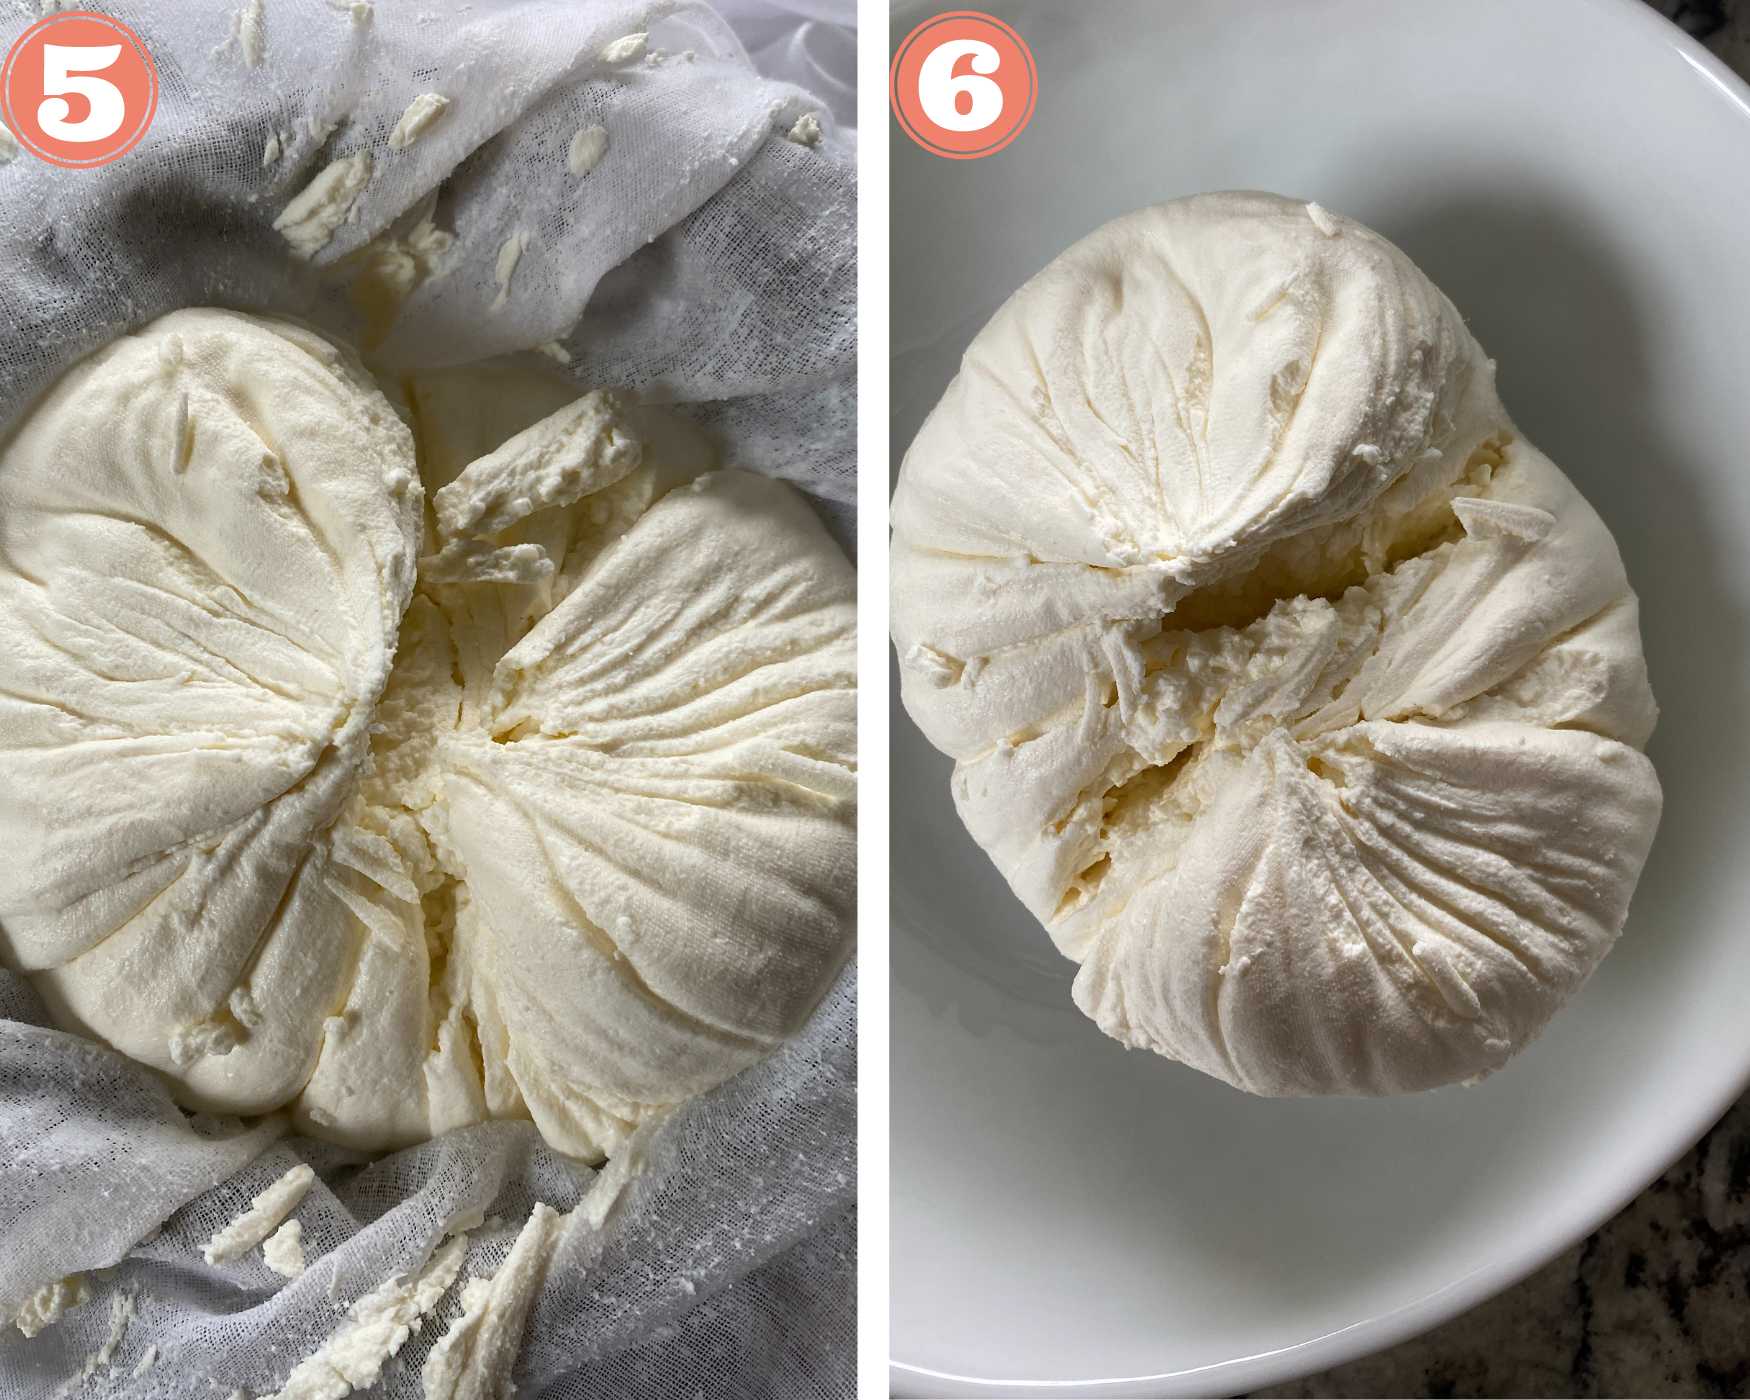 Open the strained yogurt and transfer to a bowl.